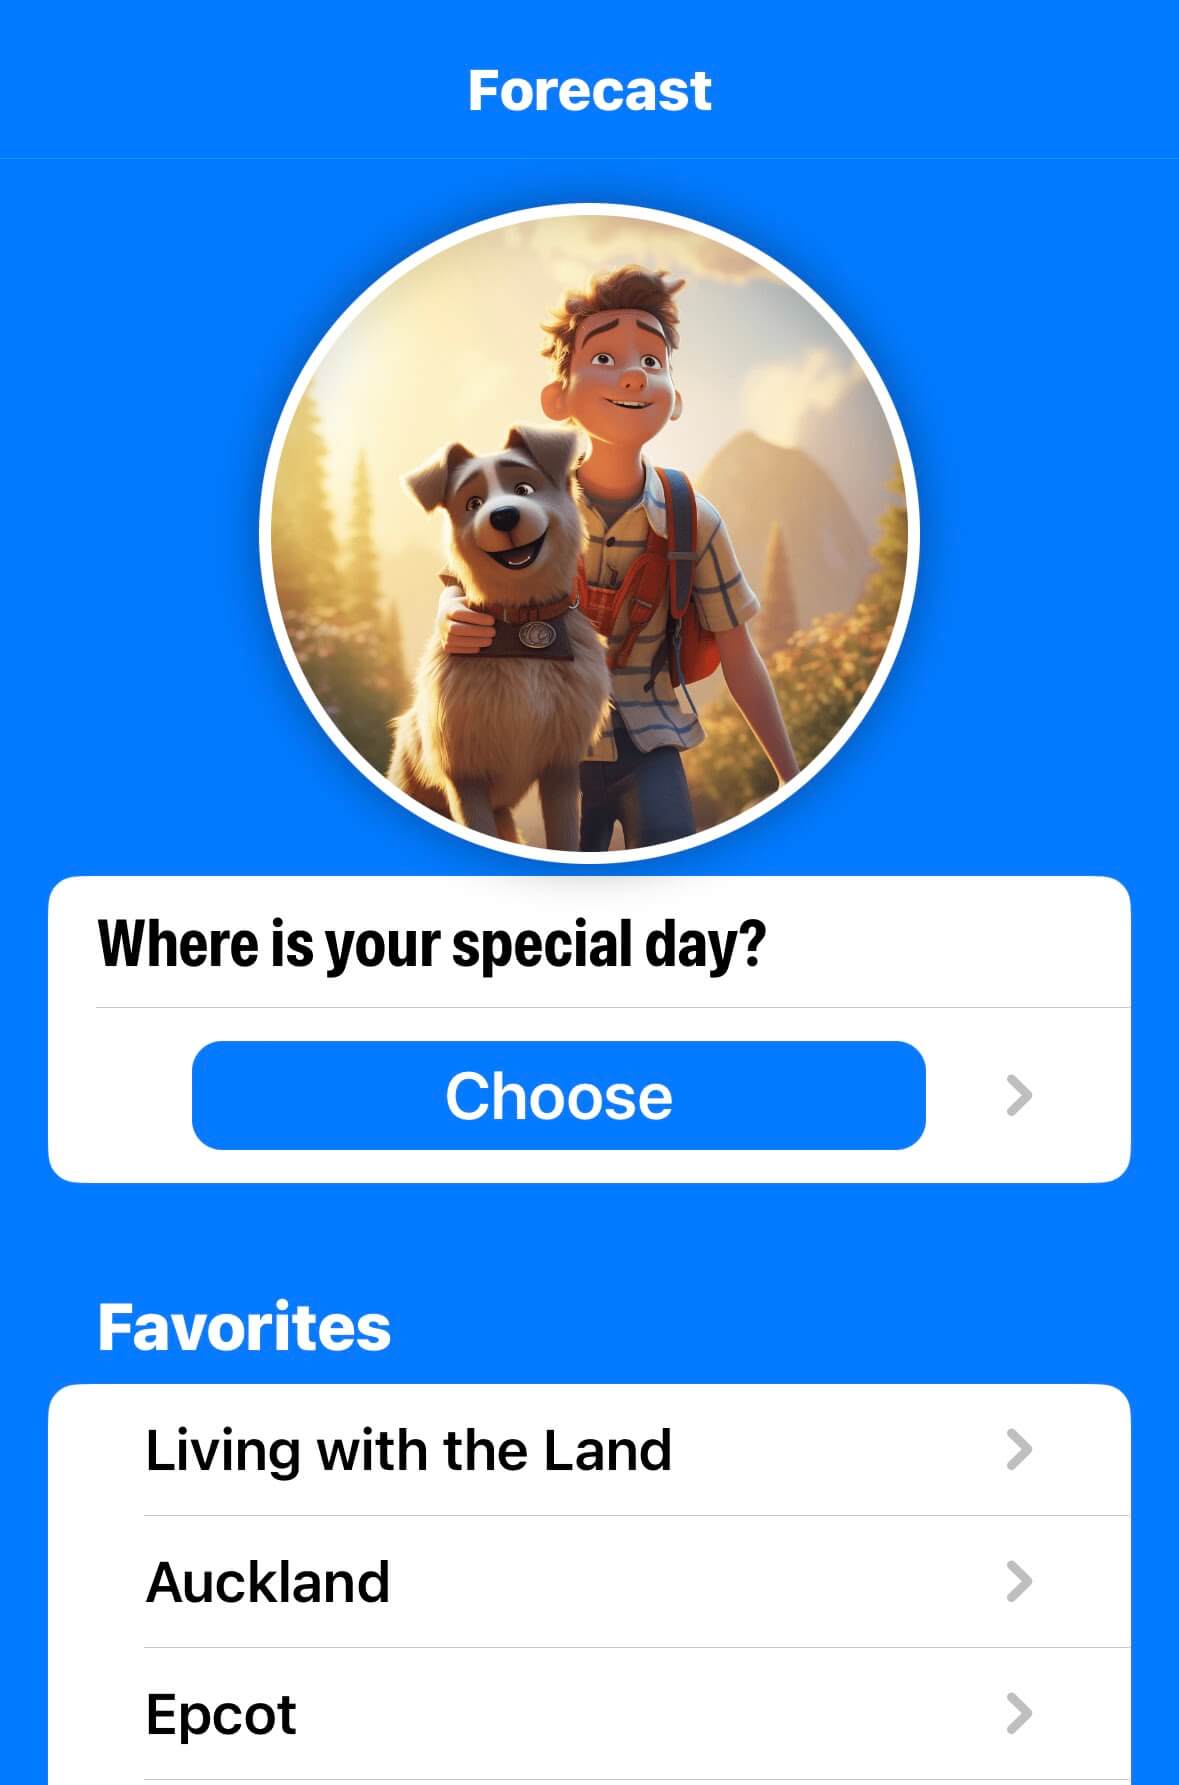 The new starting screen when you have saved favorites. It&rsquo;s showing an image of a man and his dog stopping on a walk during a sunny day.